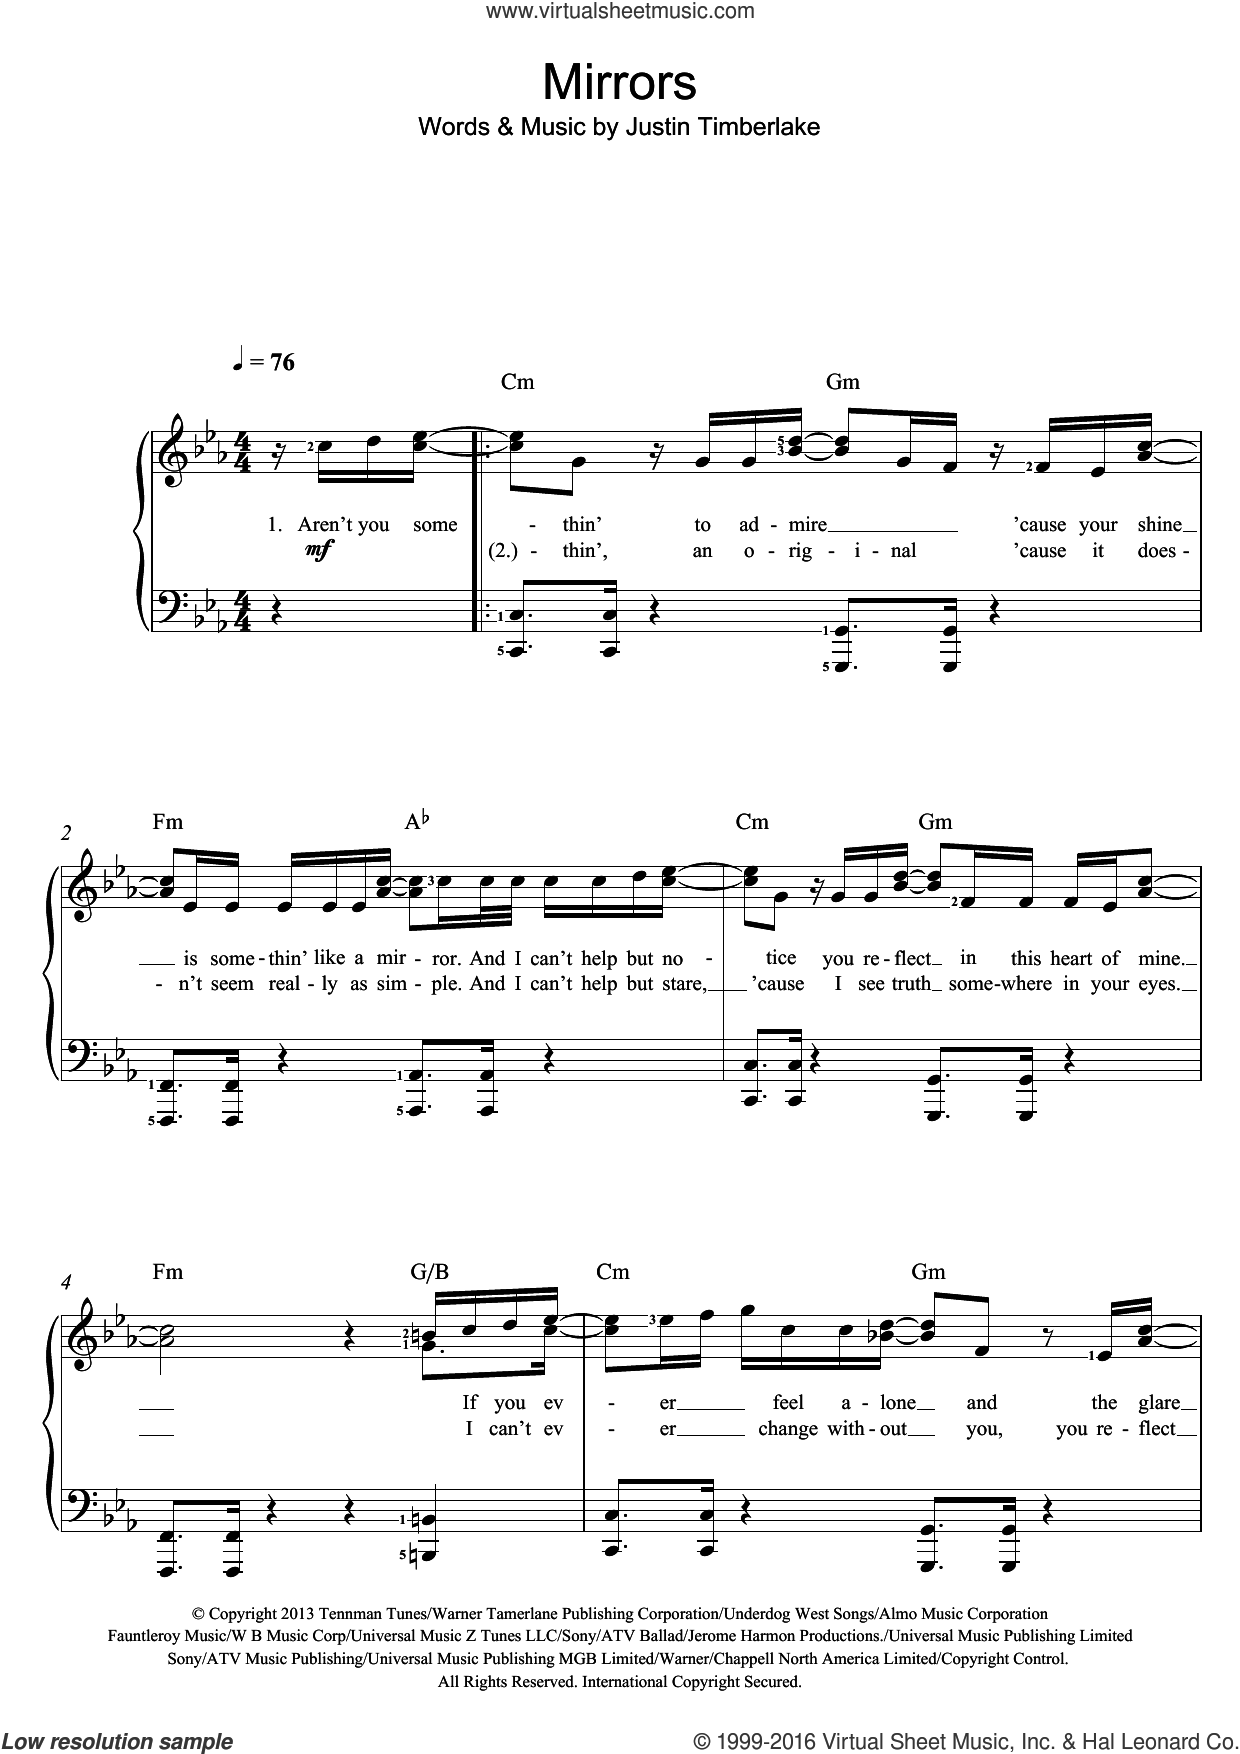 Keyboard Free Beginner Piano Sheet Music For Adults / Free Sheet Music Scores - A huge collection of piano sheet music with corresponding animated tutorials.